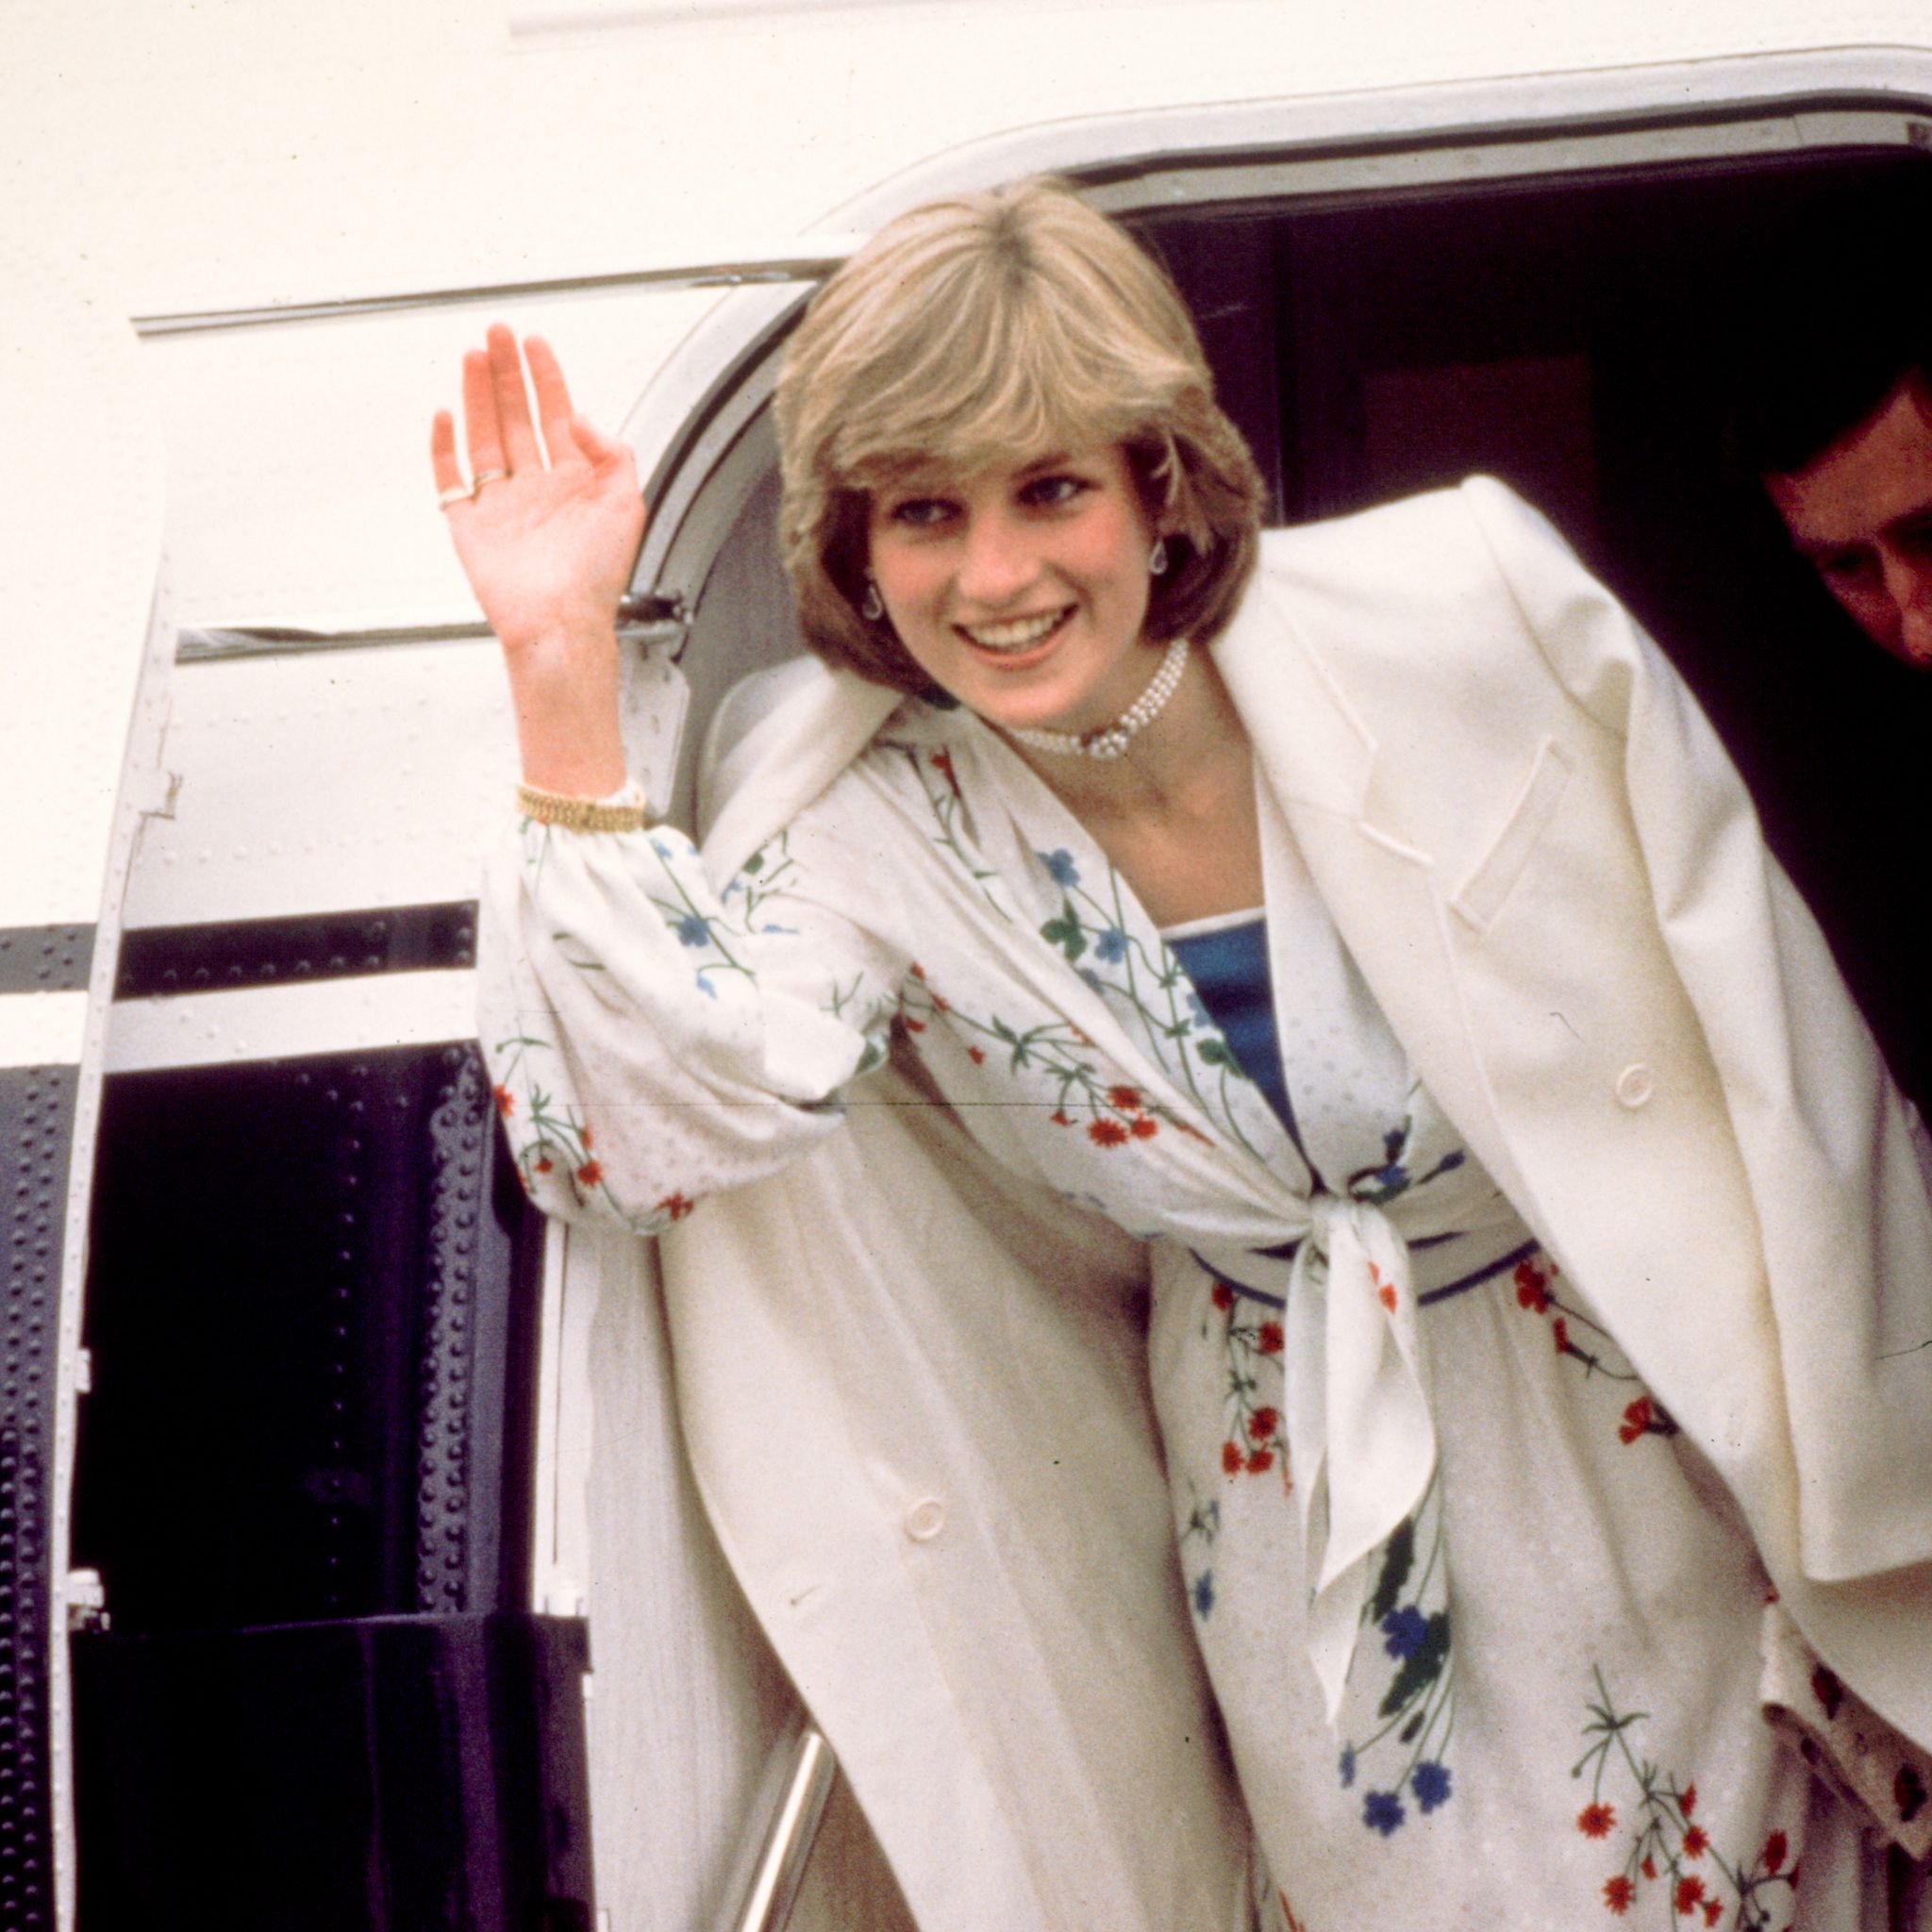 Unseen video shows Princess Diana in hysterics at Prince Charles